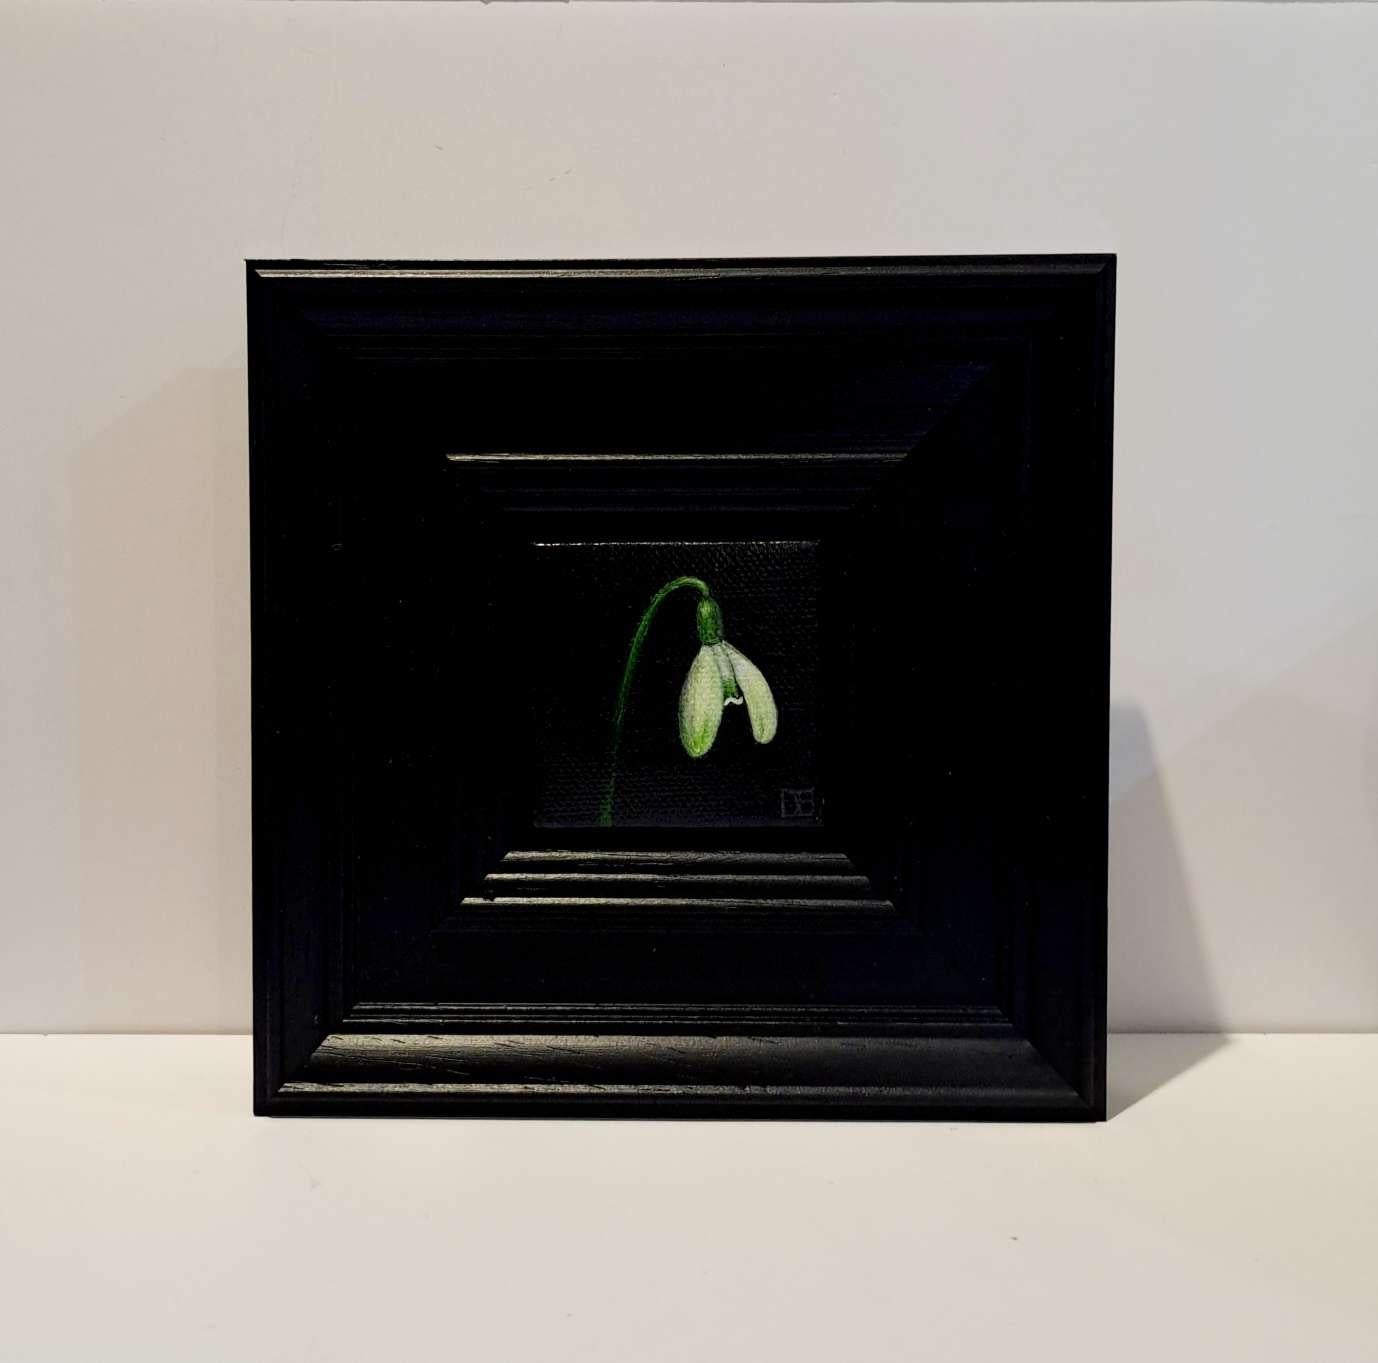 Pocket Snowdrop 4 is an original oil painting by Dani Humberstone as part of her Pocket Painting series featuring small scale realistic oil paintings, with a nod to baroque still life painting. The paintings are set in a black wood layered